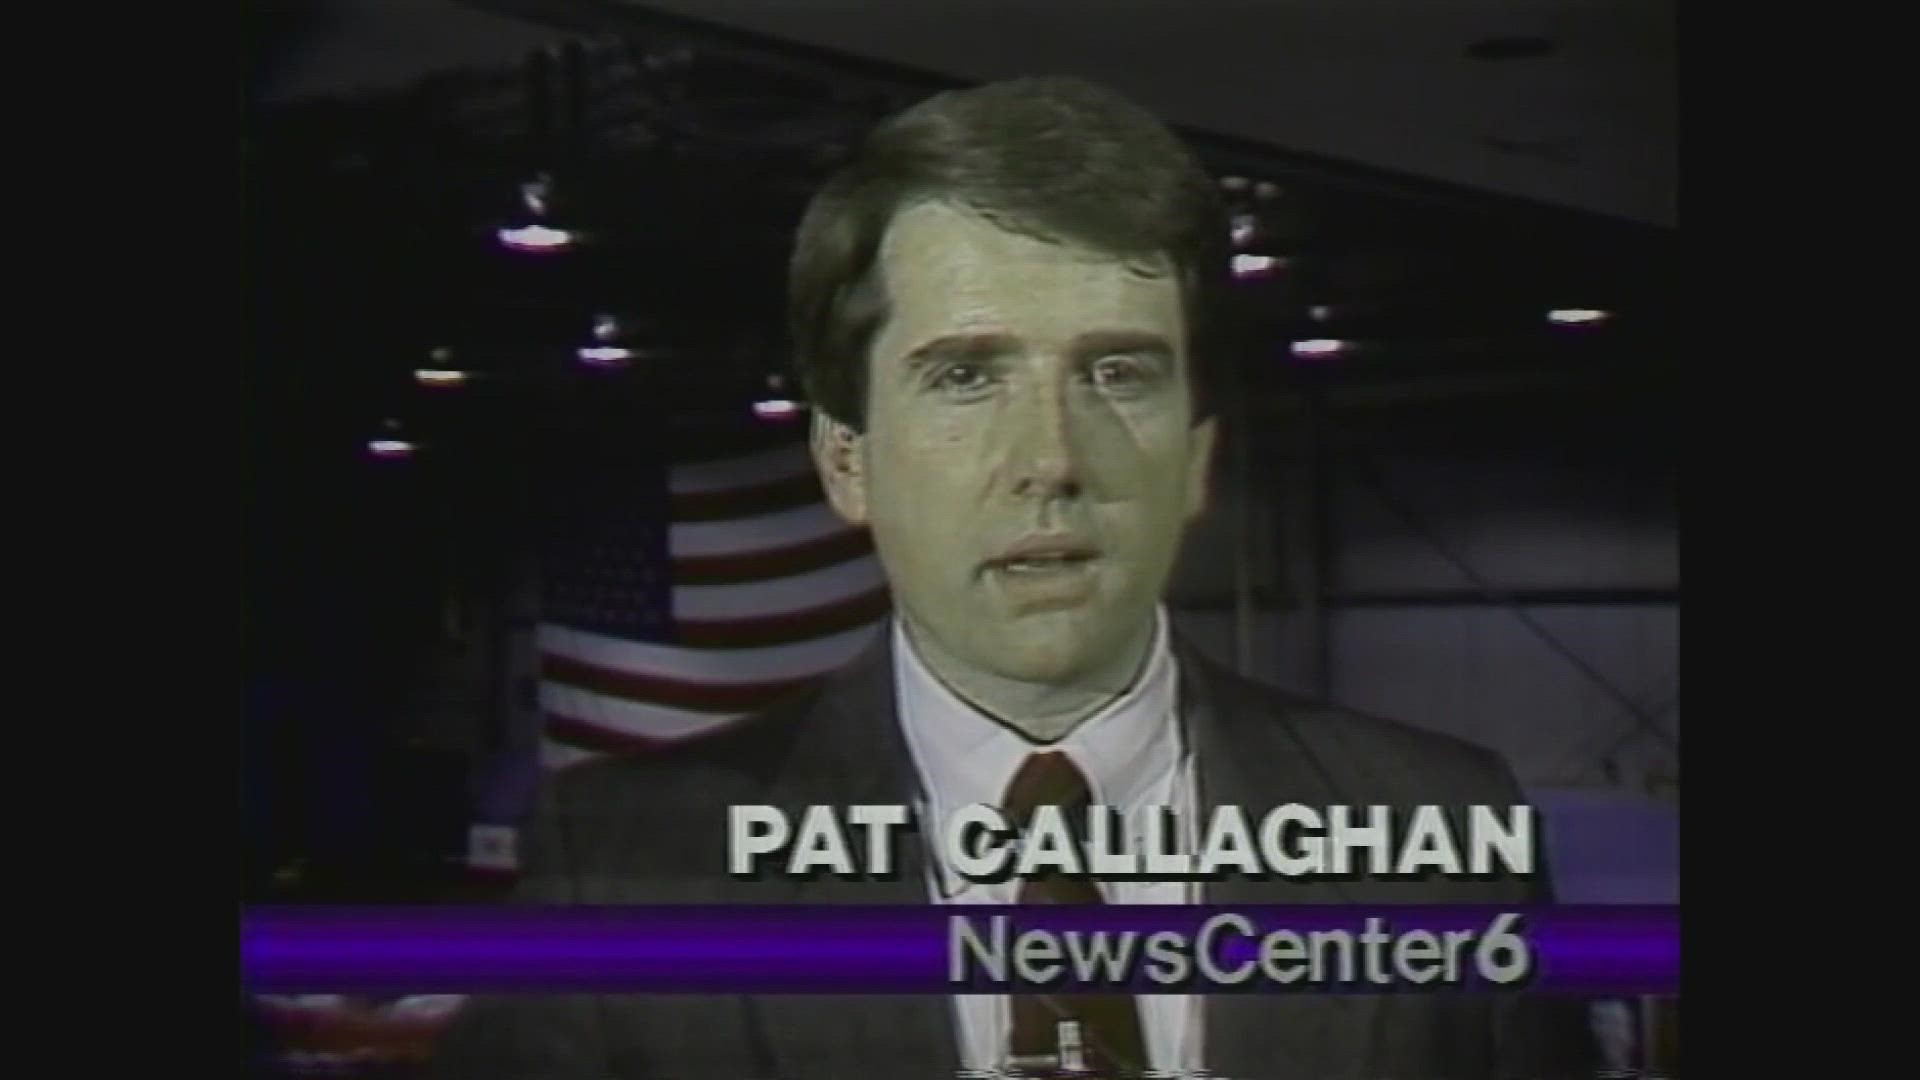 After 43 years at NEWS CENTER Maine, Pat Callaghan finally says goodbye on Friday.